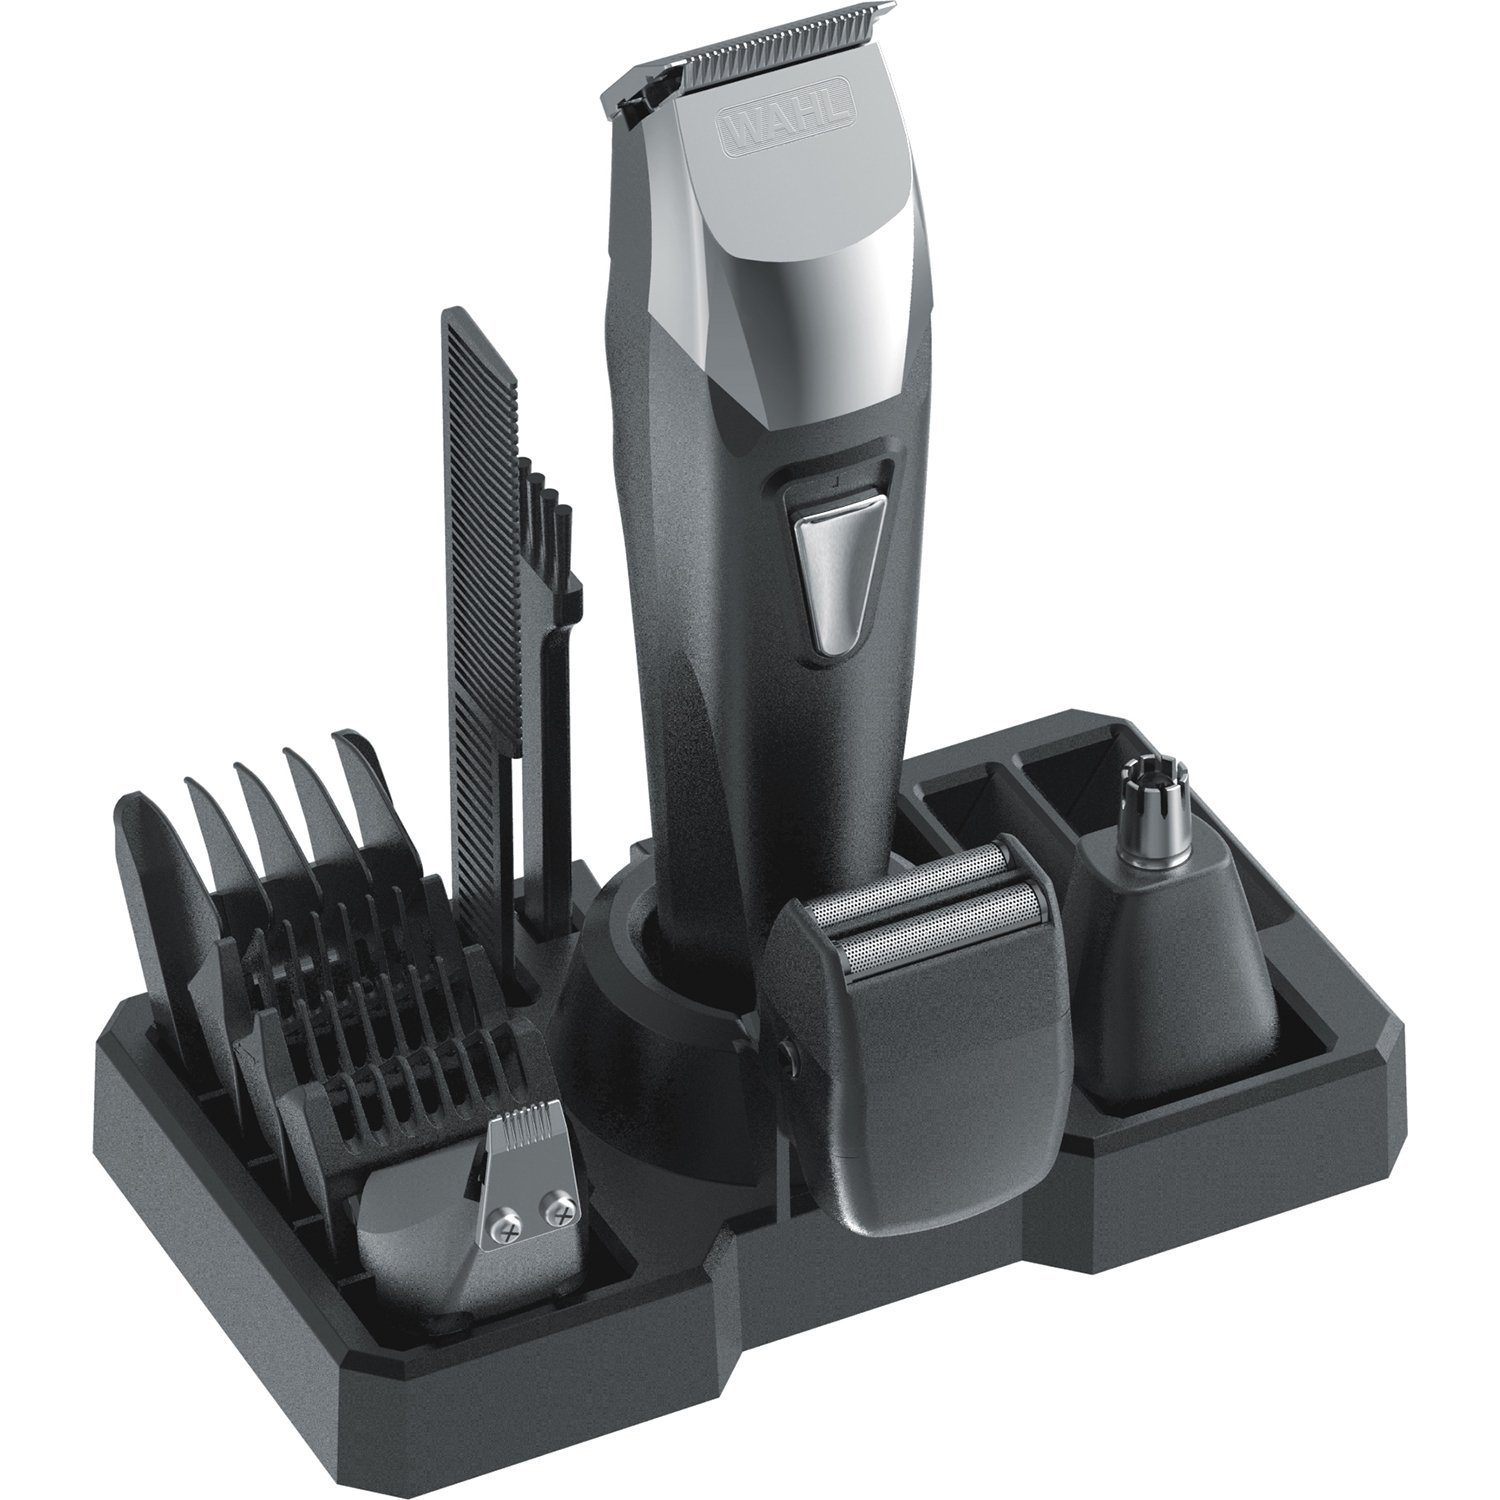 Wahl Groomsman Pro All-in-One Rechargeable Grooming Kit Only $23.56!